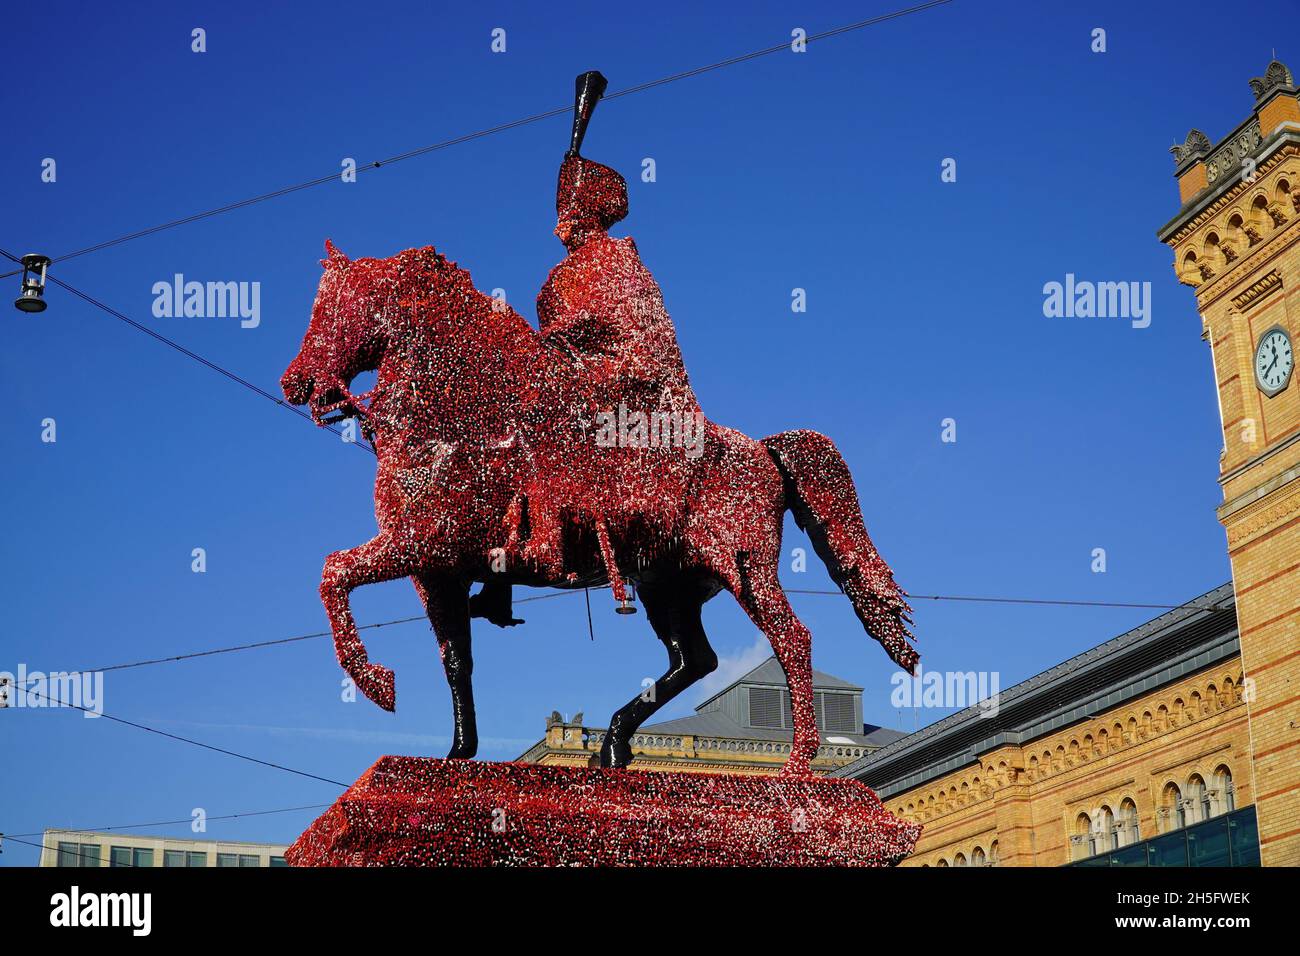 Equestrian statue of Ernest Augustus, King of Hanover. The monument was now wrapped in black foil and all citizens may decorate it with colorful dots. Stock Photo